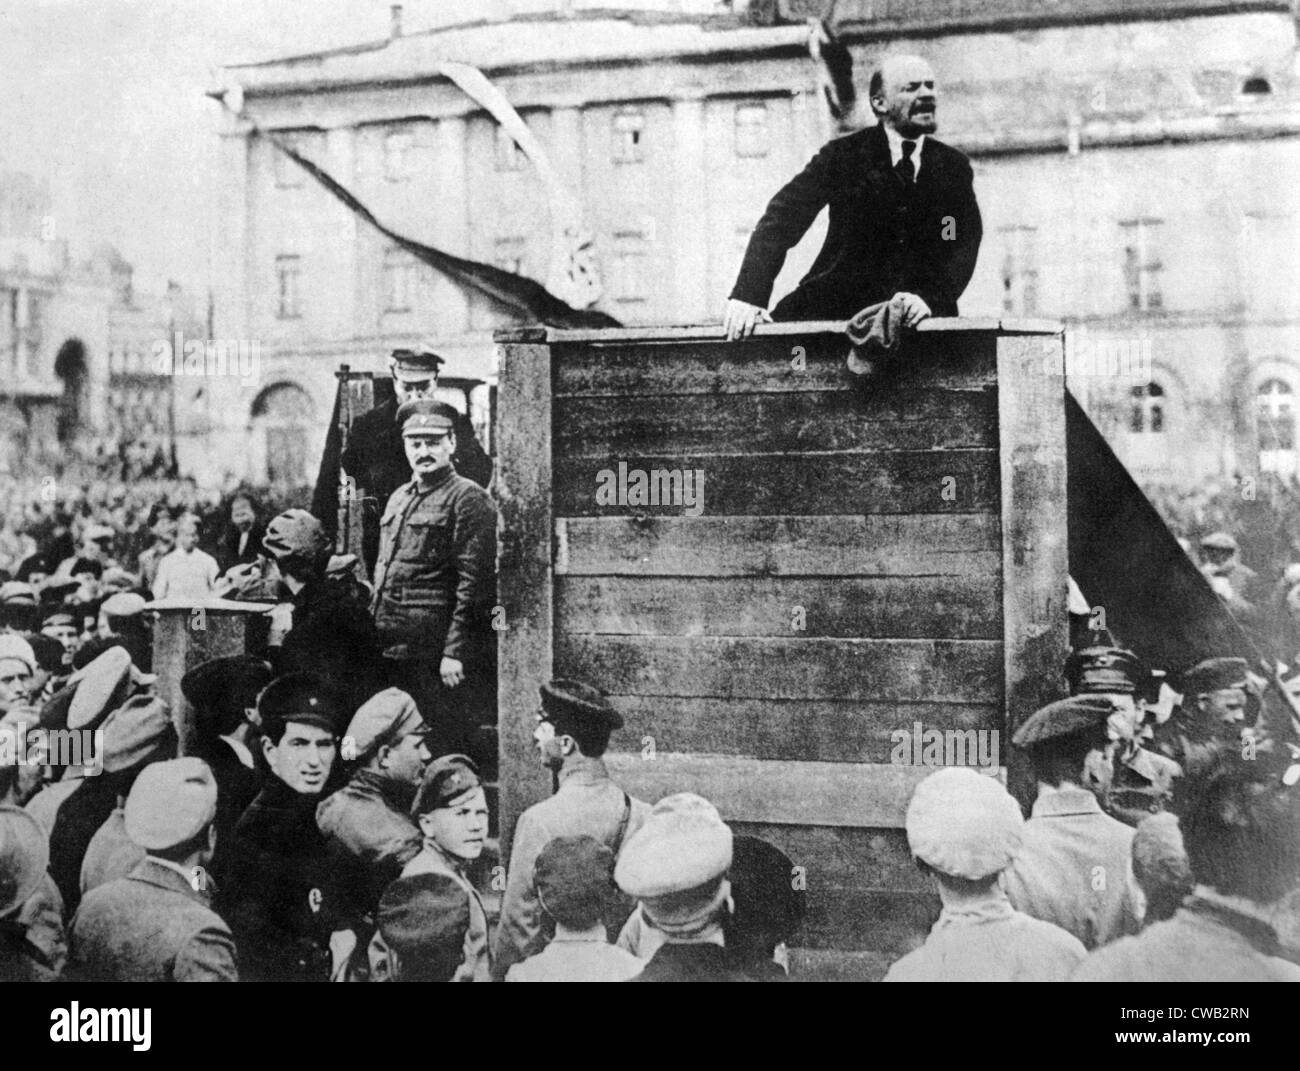 Vladimir Ilyich (aka Nicolei) Lenin delivers a speech while Leon Trotsky listens at right, 1919 Stock Photo